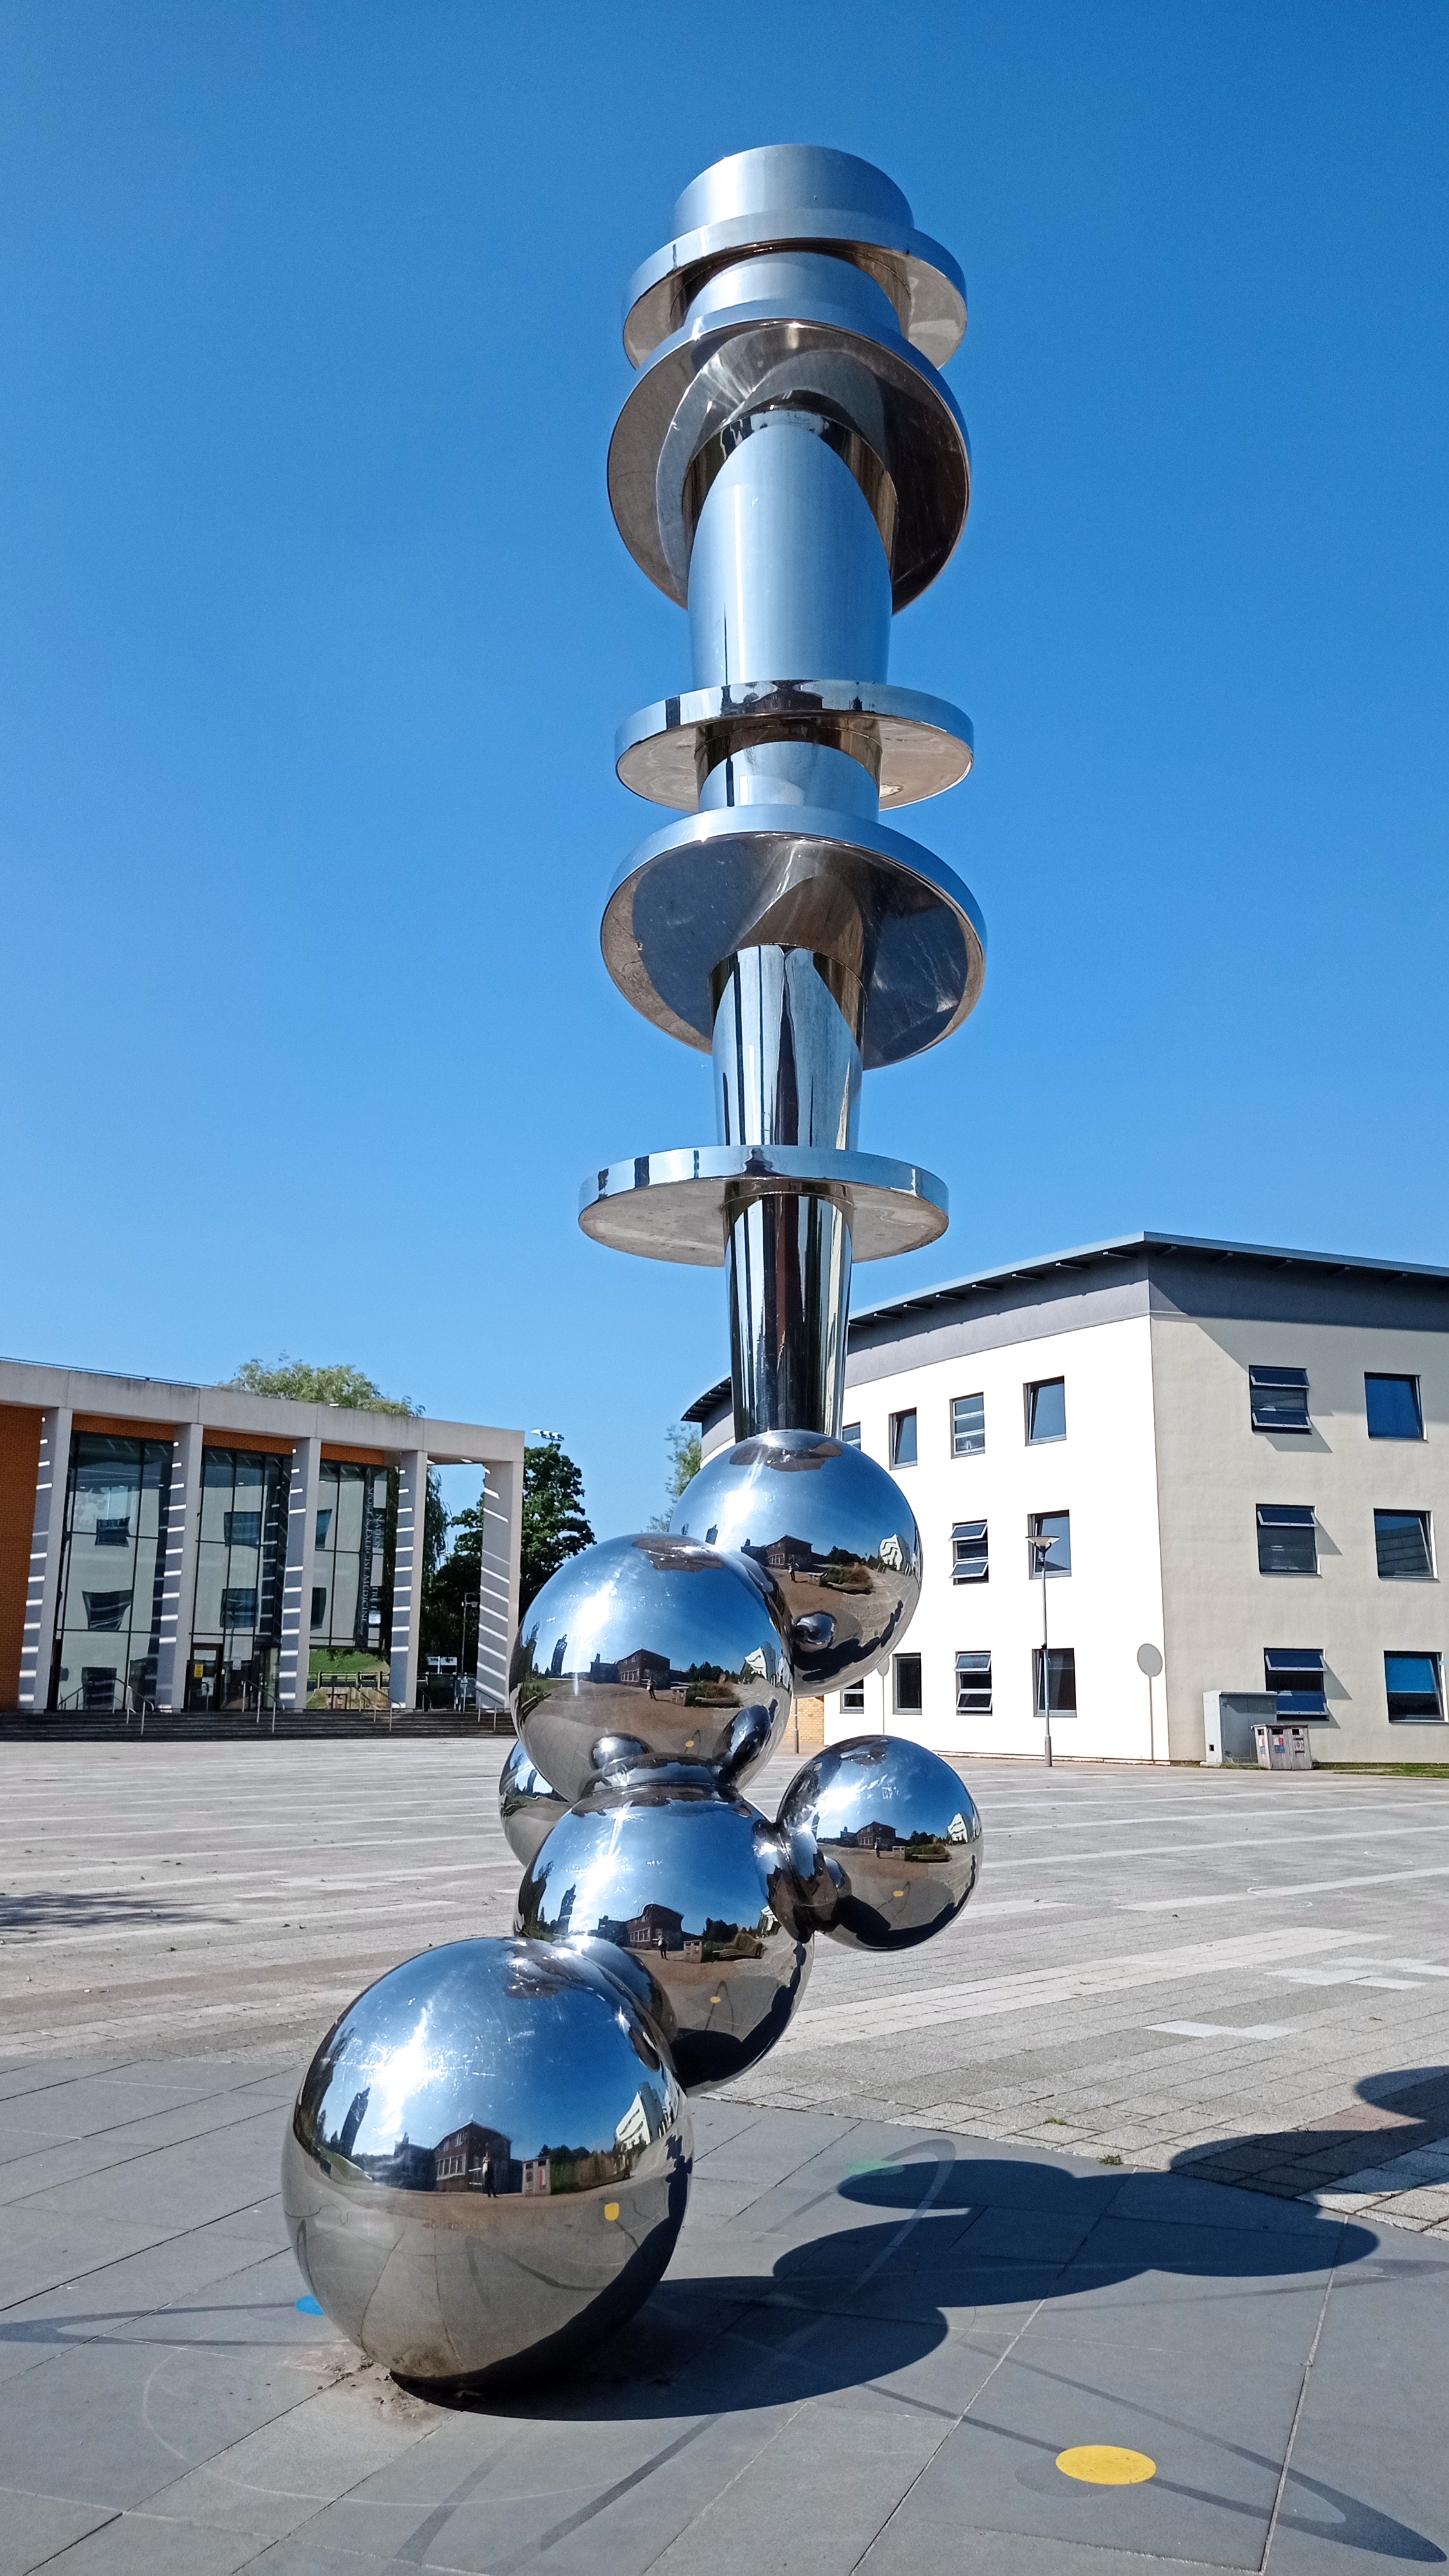 Tall abstract stainless steel sculpture with spherical forms combining to make a column